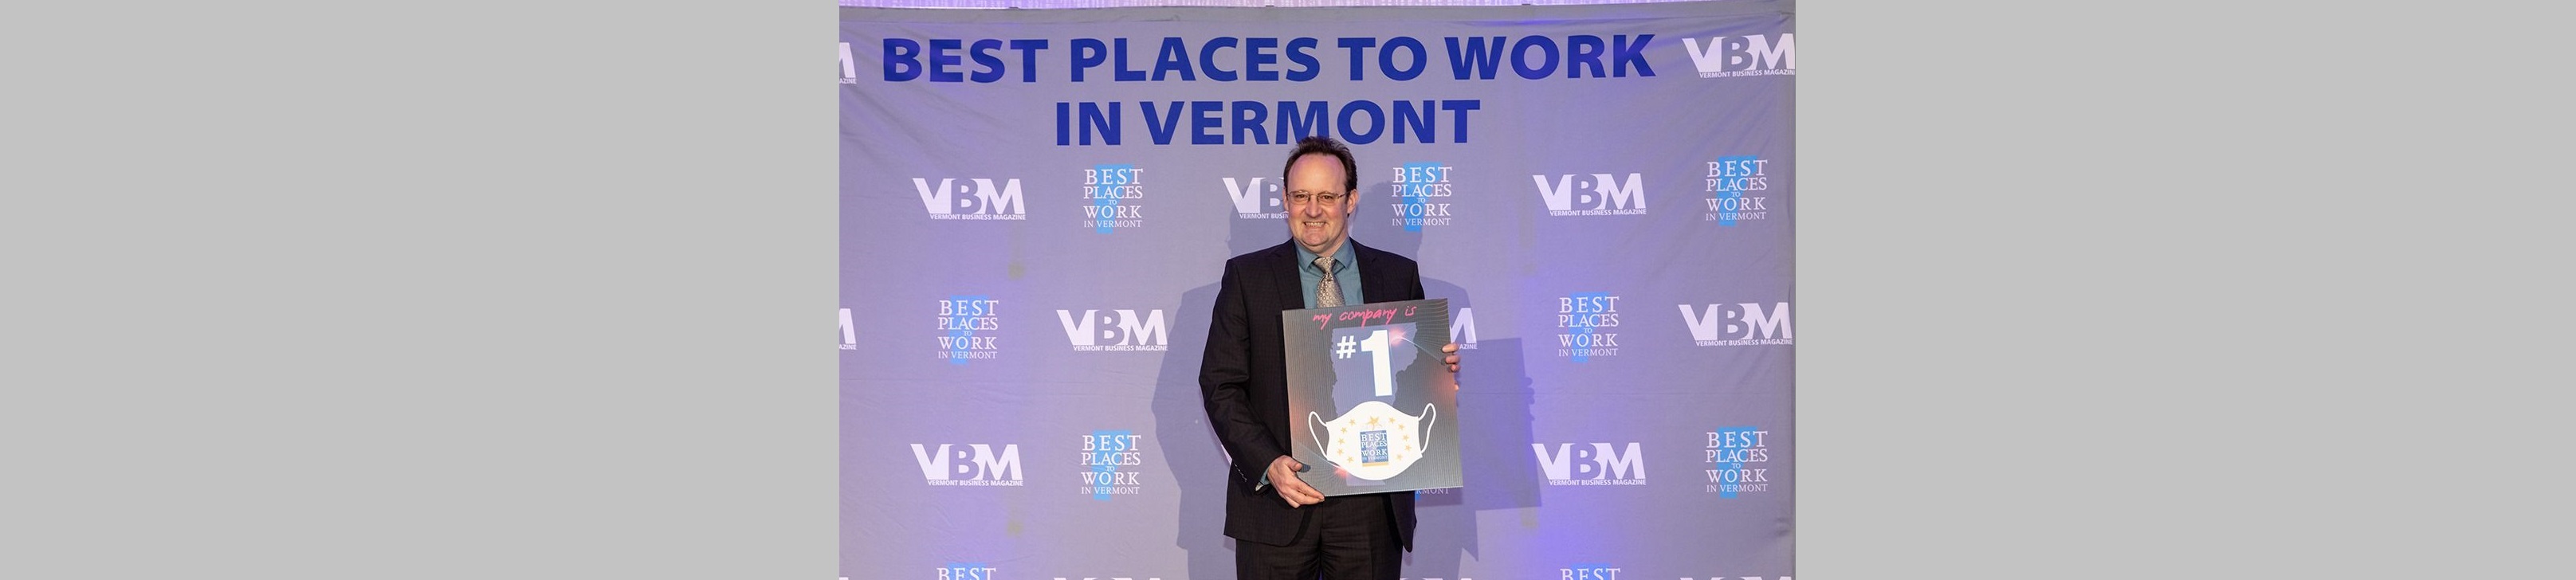 Mike Slattery holds #1 Best Place to Work in Vermont Award